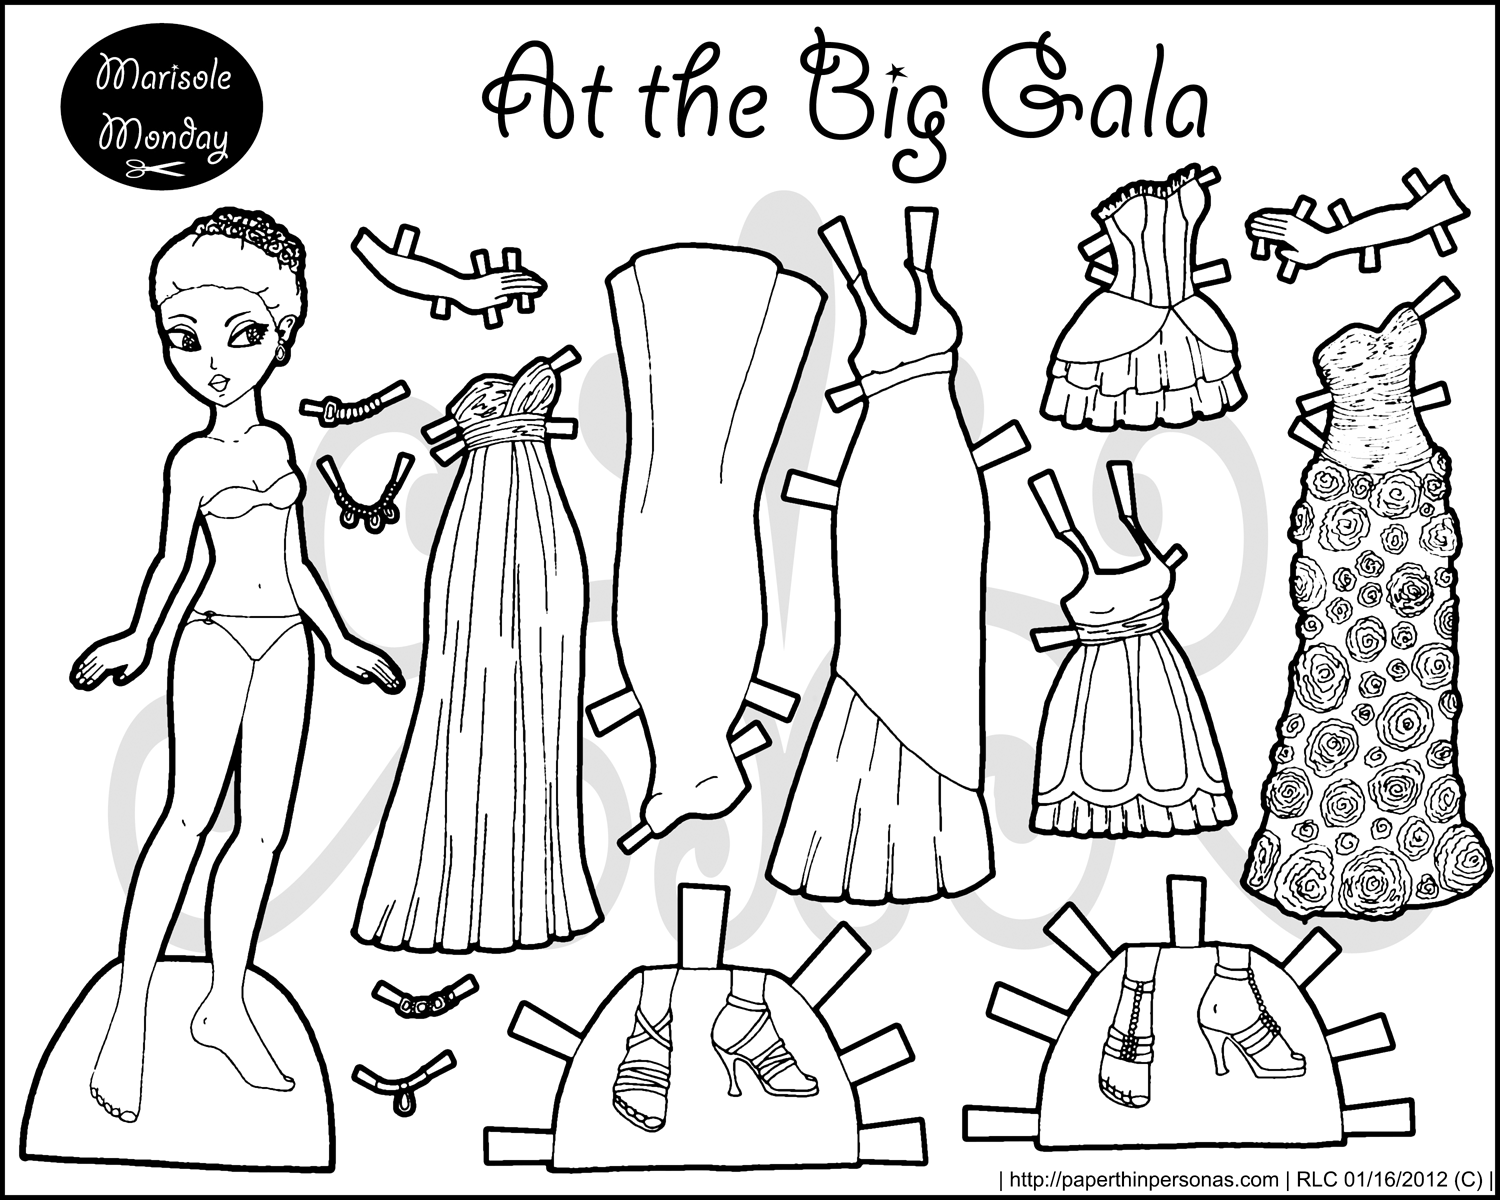 Three sets of marisole paper dolls in black and white â paper thin personas